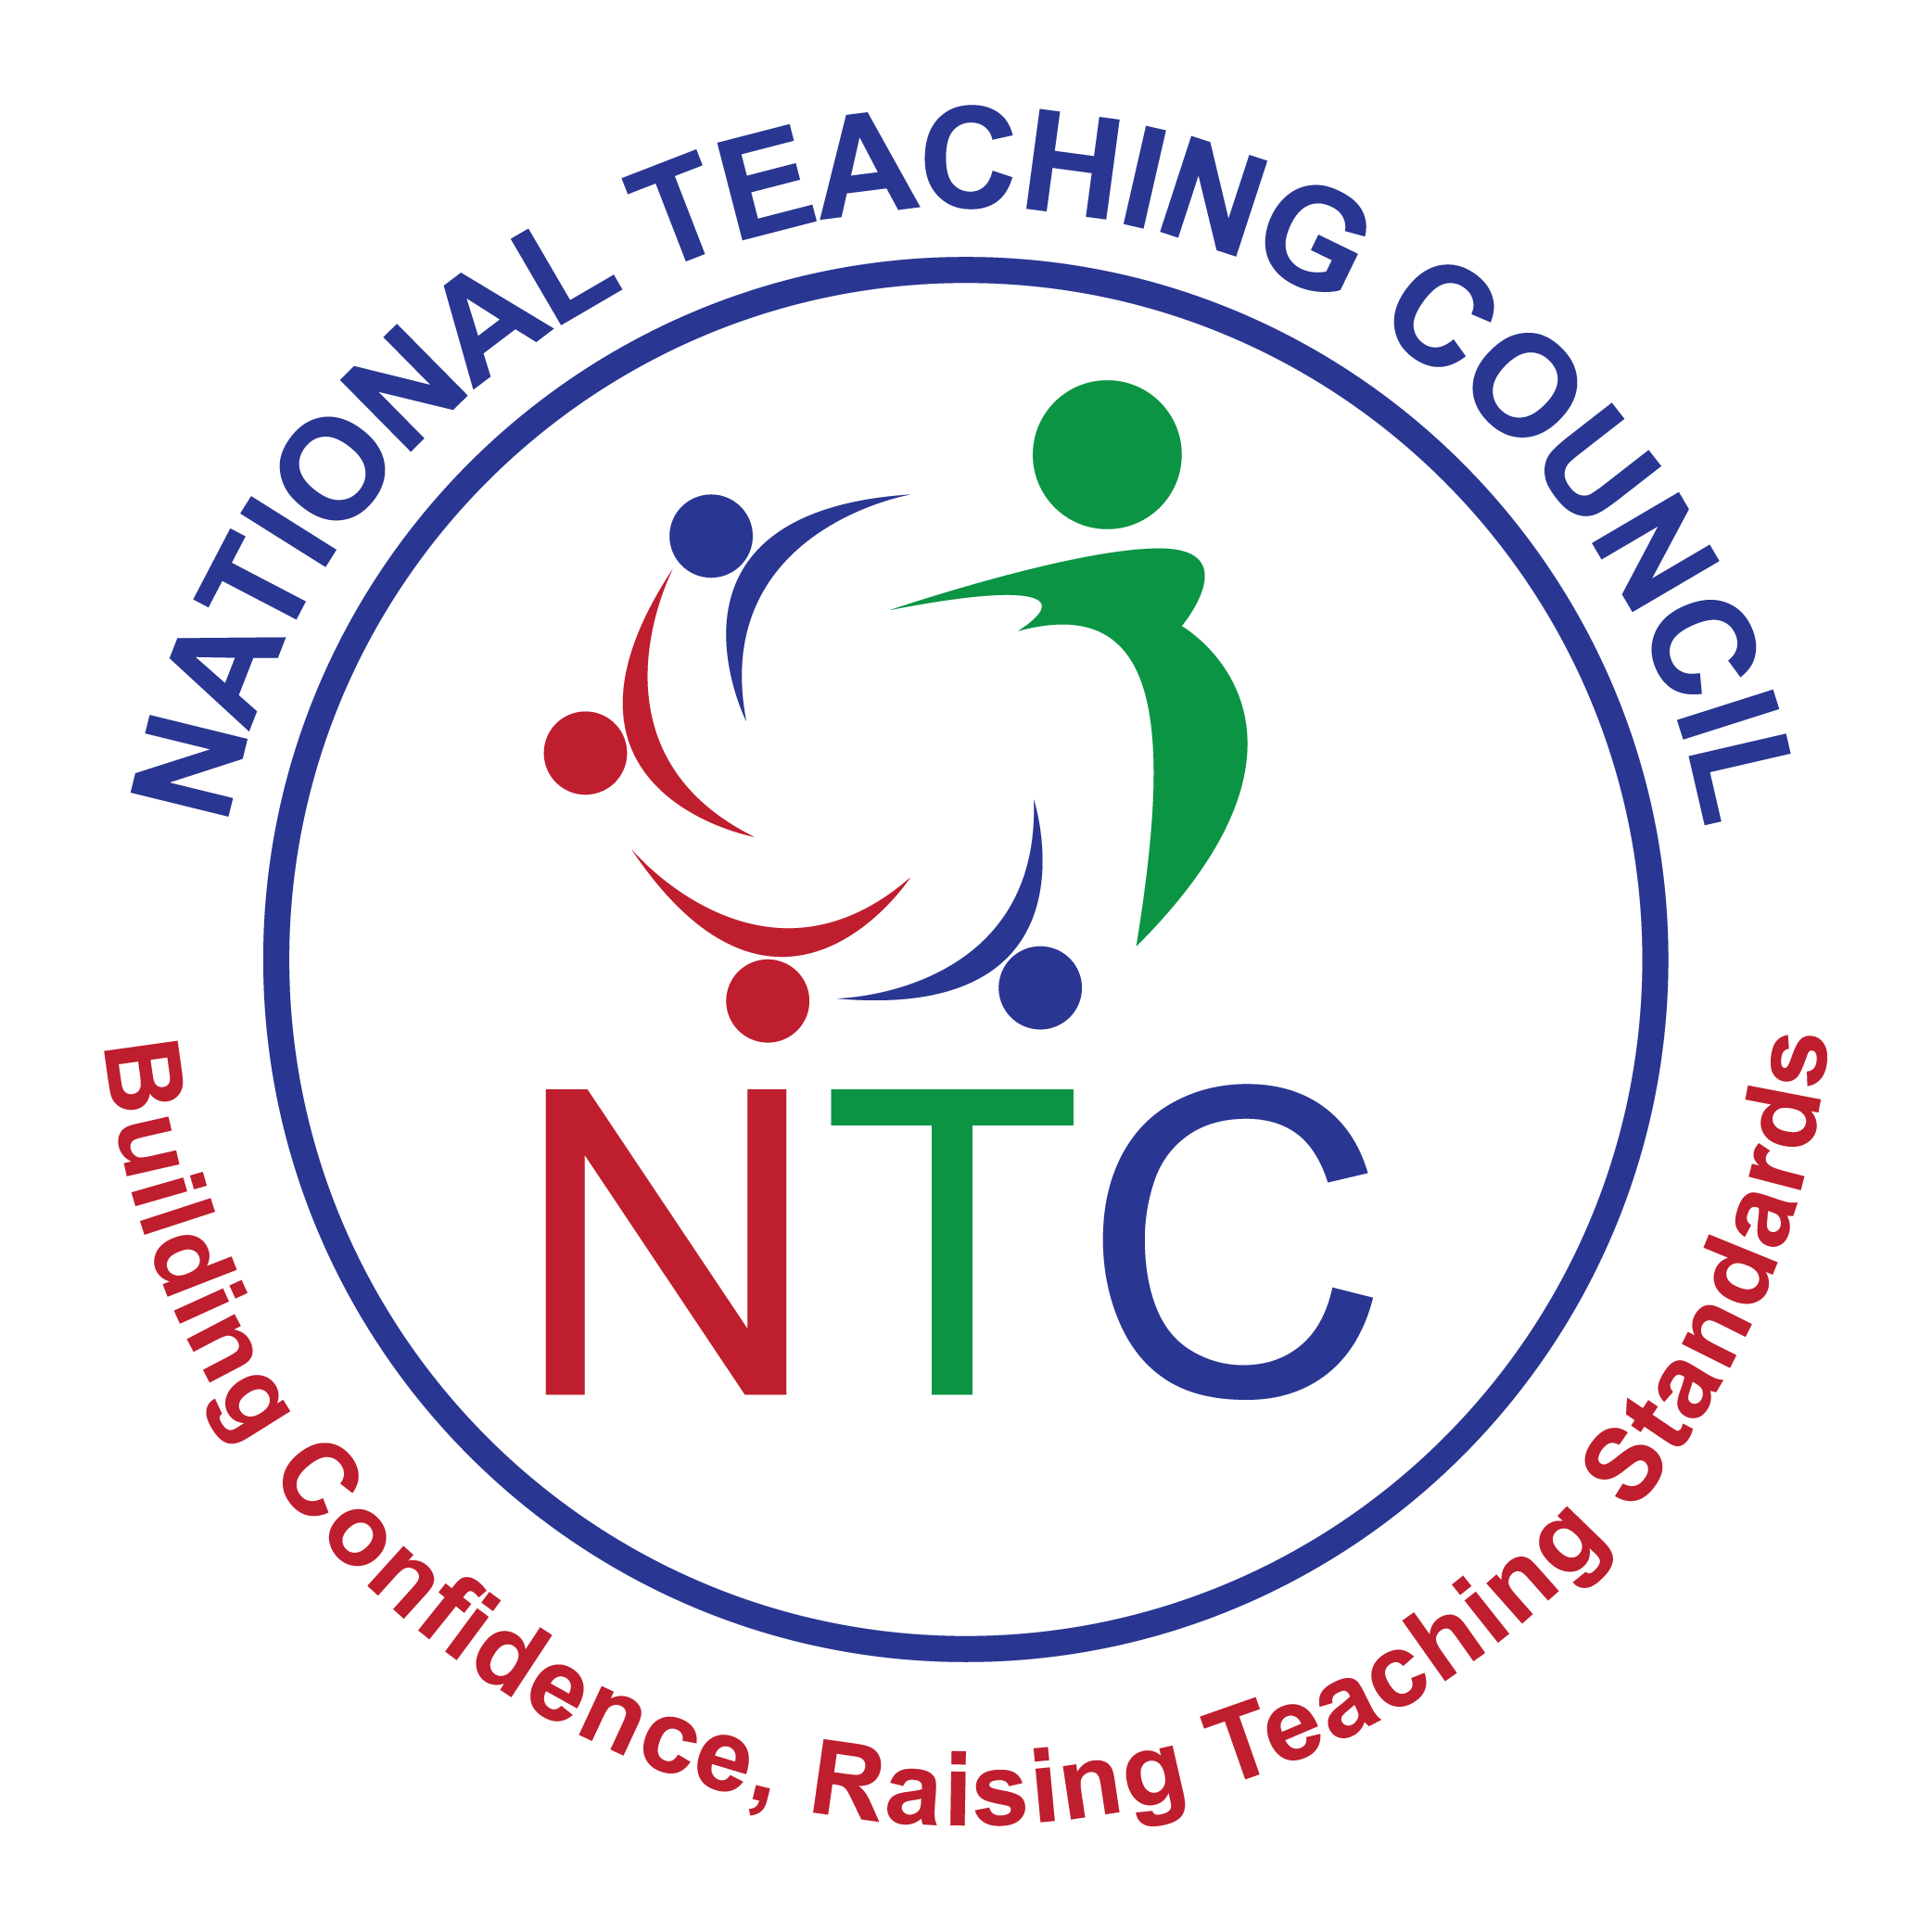 How to Buy NTC Exams Registration Vouchers - 2021